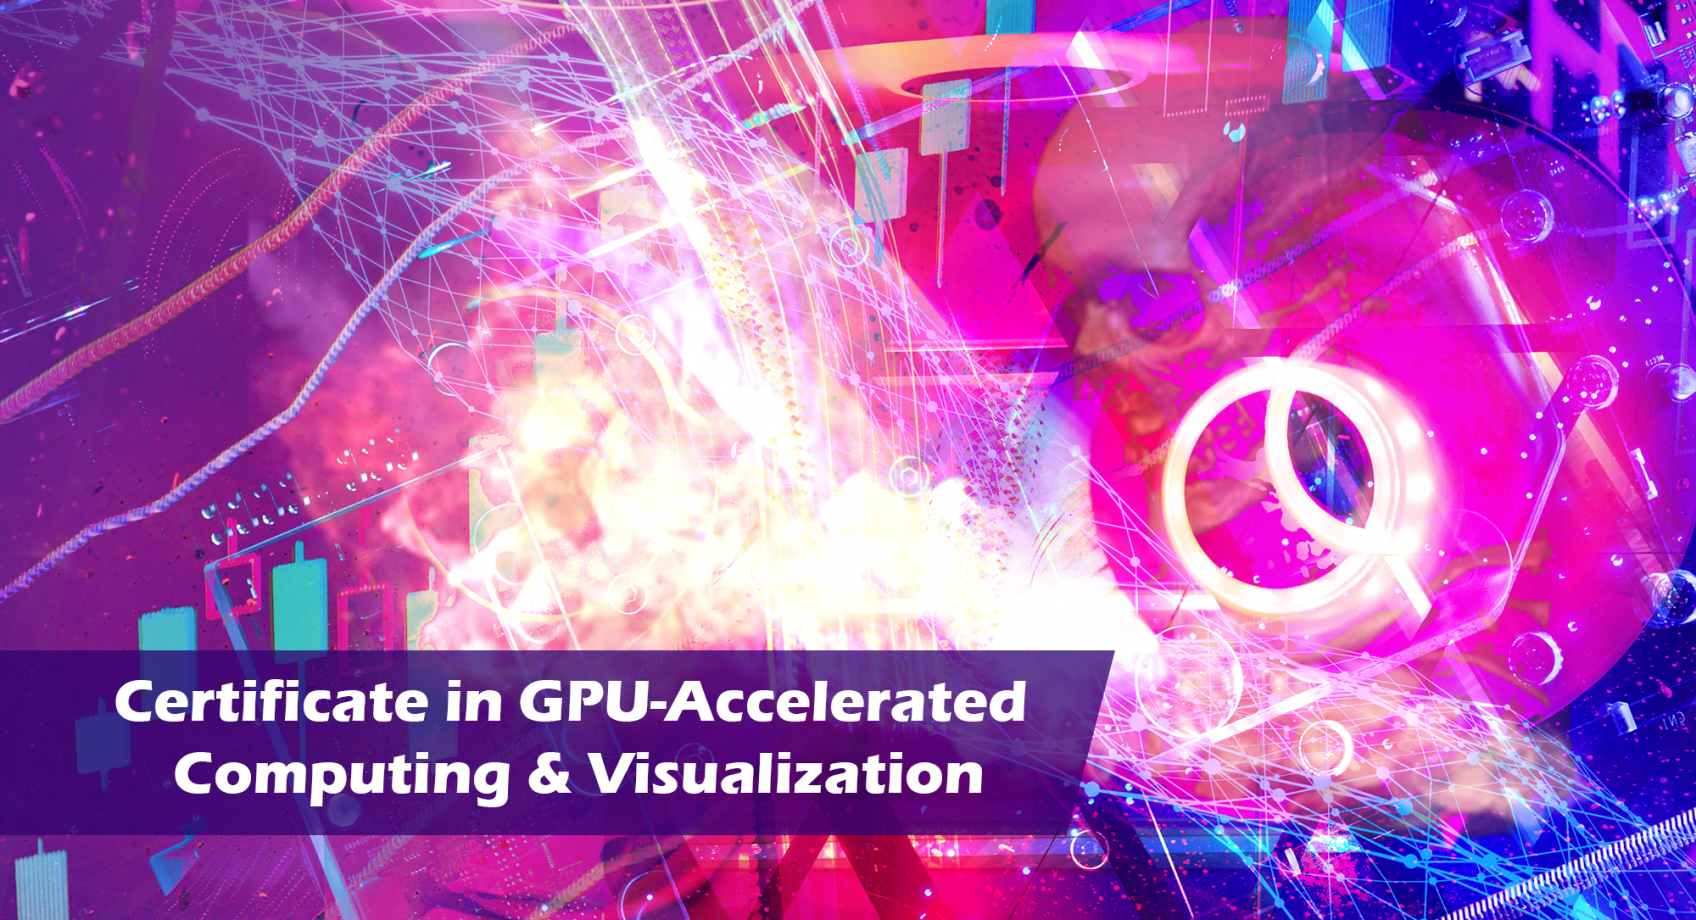 UW ECE launches new online certificate program in GPU-Accelerated Computing and Visualization Banner